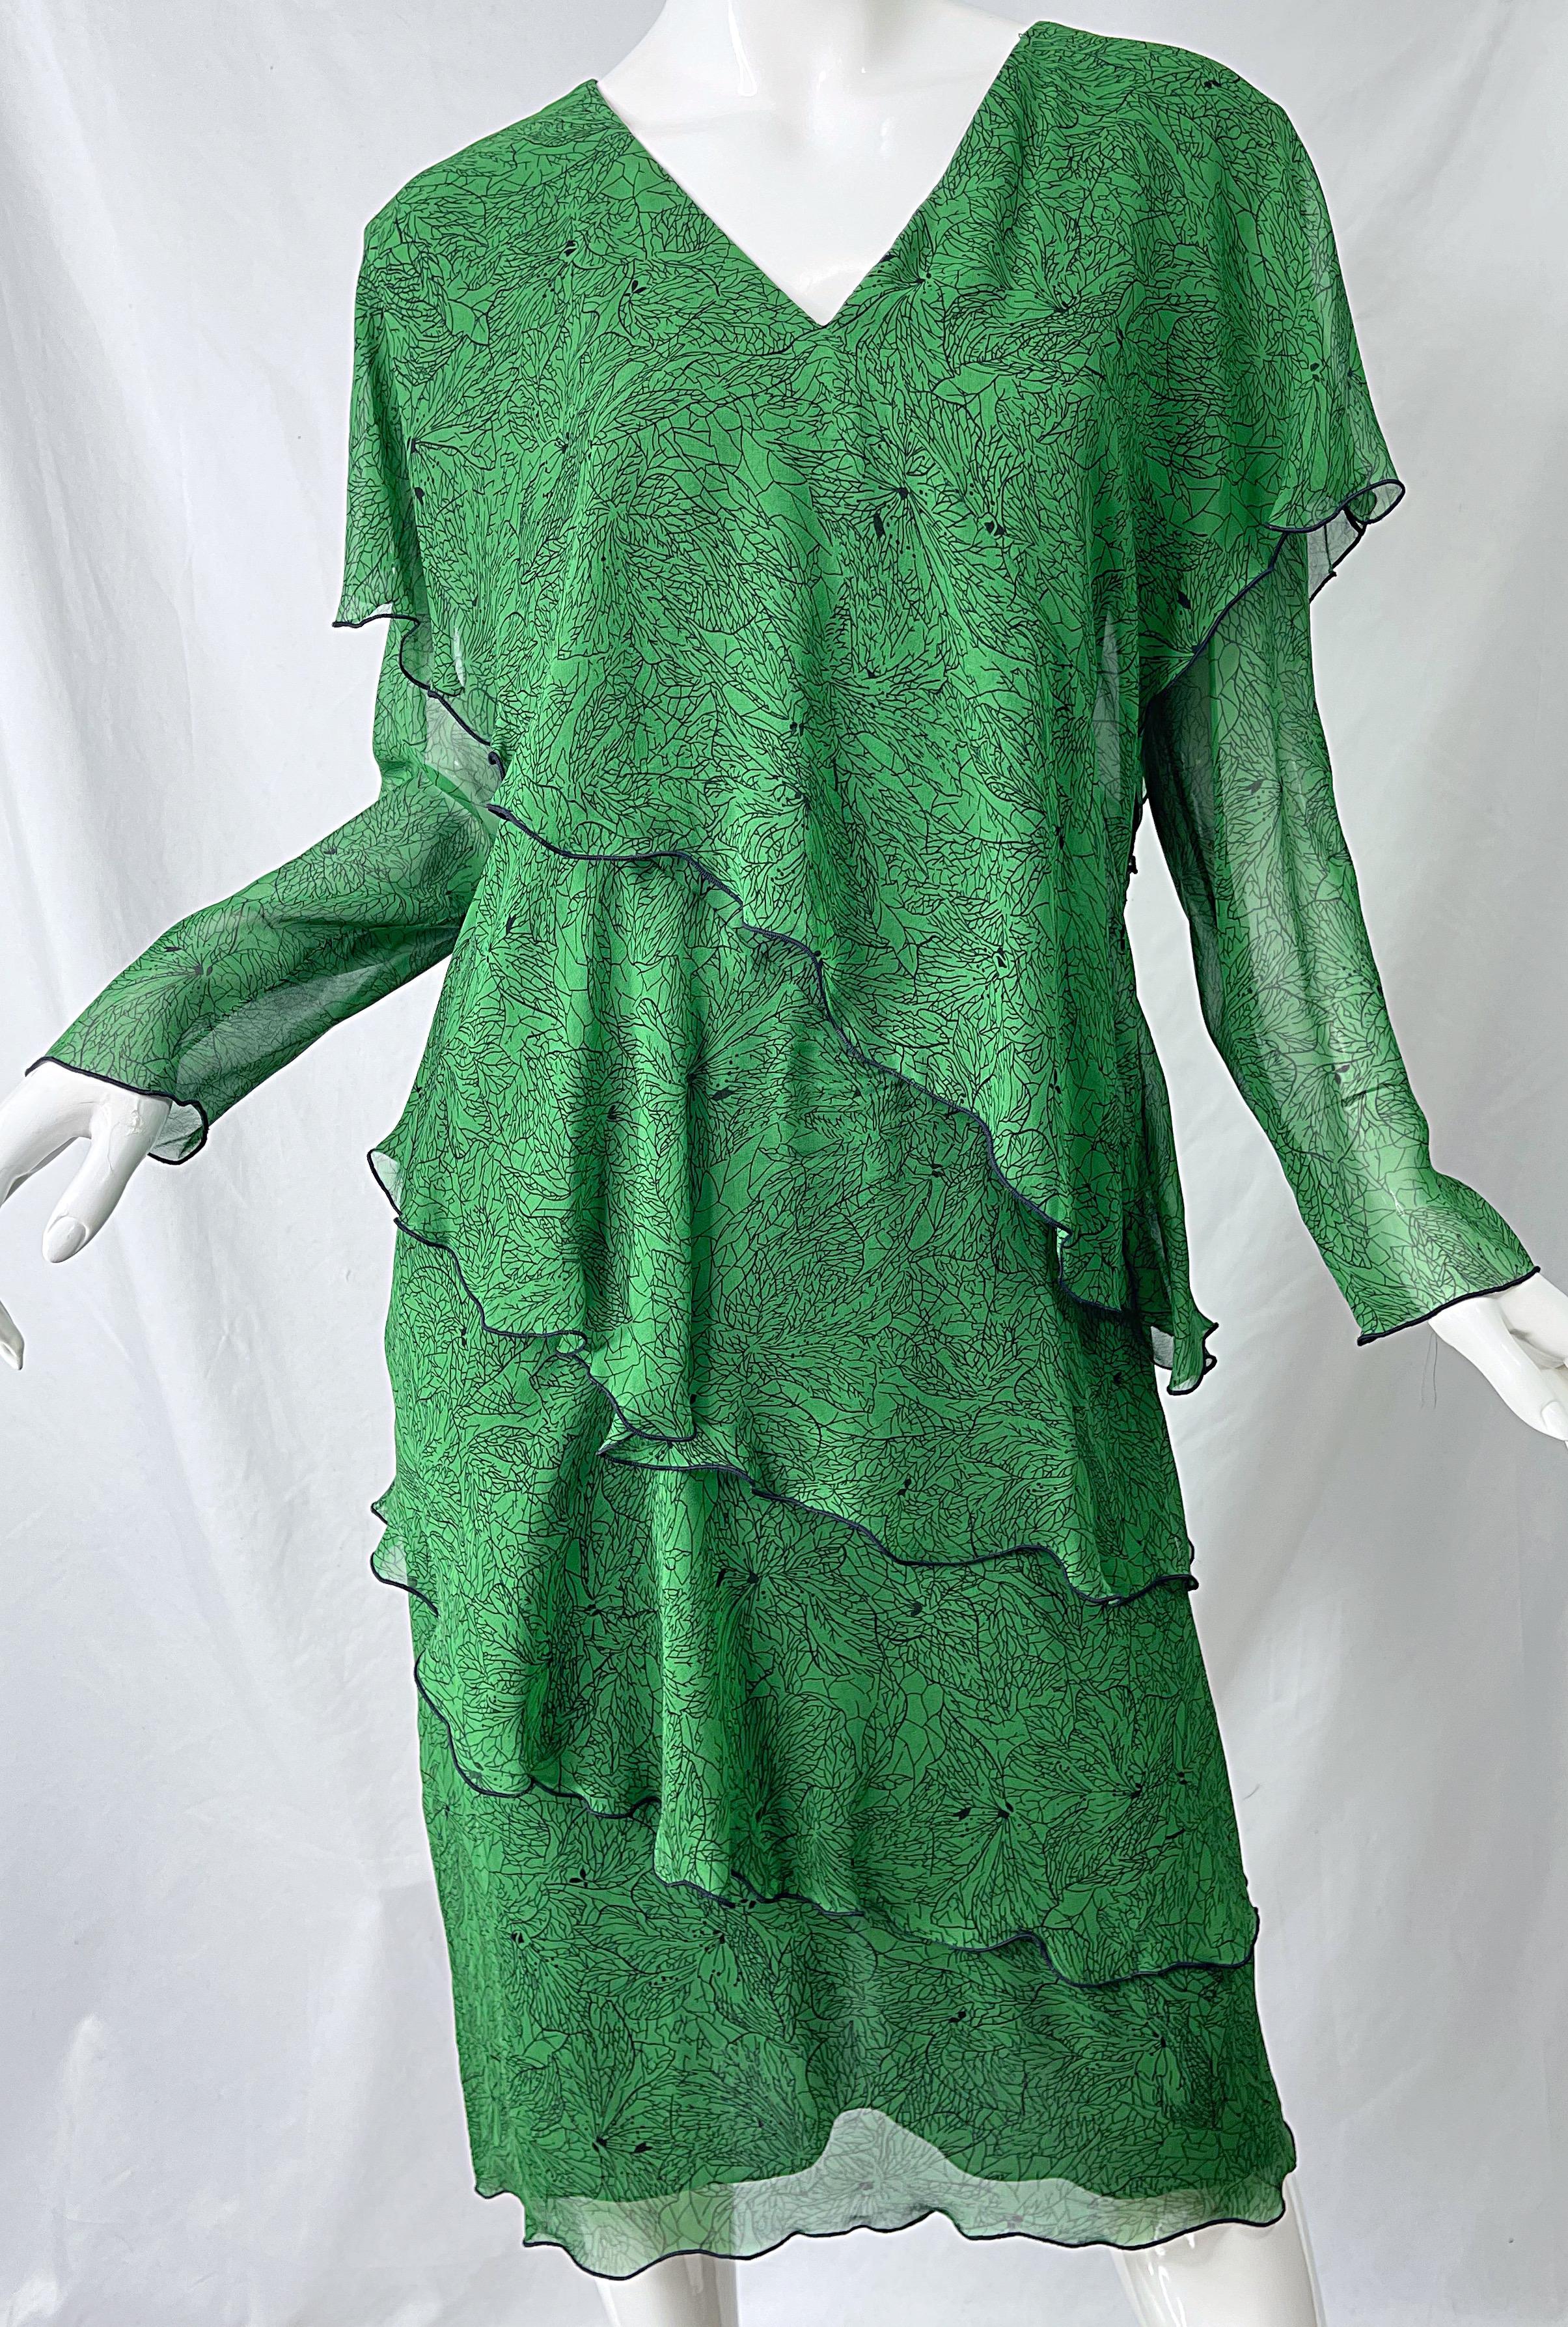 1970s Holly’s Harp Green Leaf Print Silk Chiffon Tiered Vintage 70s Dress For Sale 2